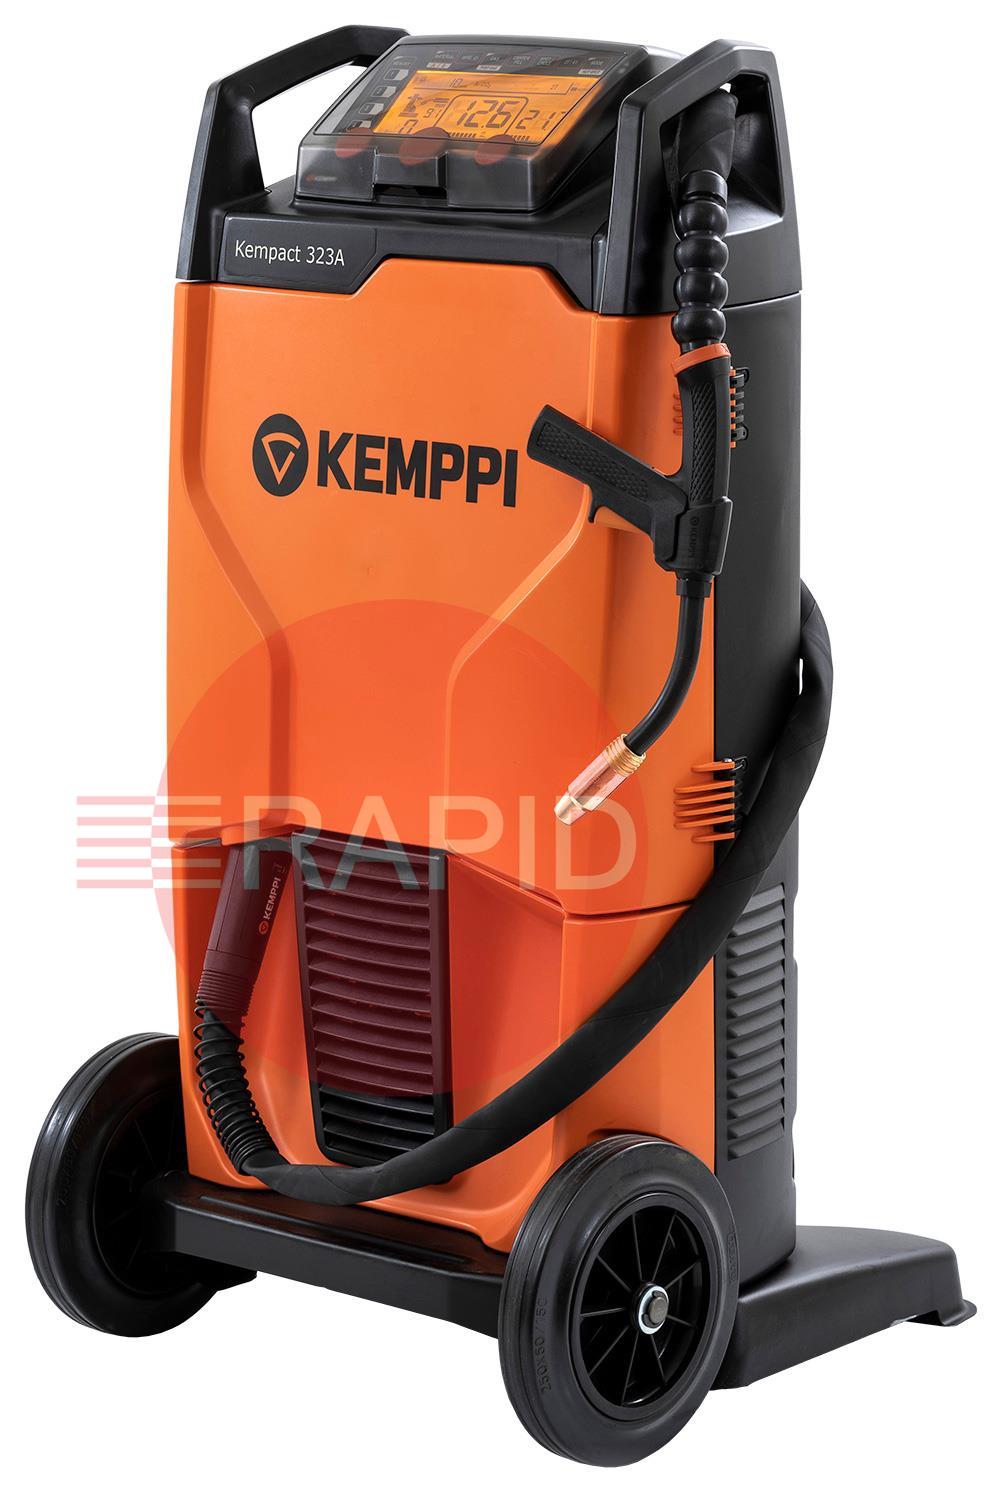 P2214GXE  Kemppi Kempact RA 323A, 320A 3 Phase 400V MIG Welder, with Flexlite GXe 405G 5.0m Torch